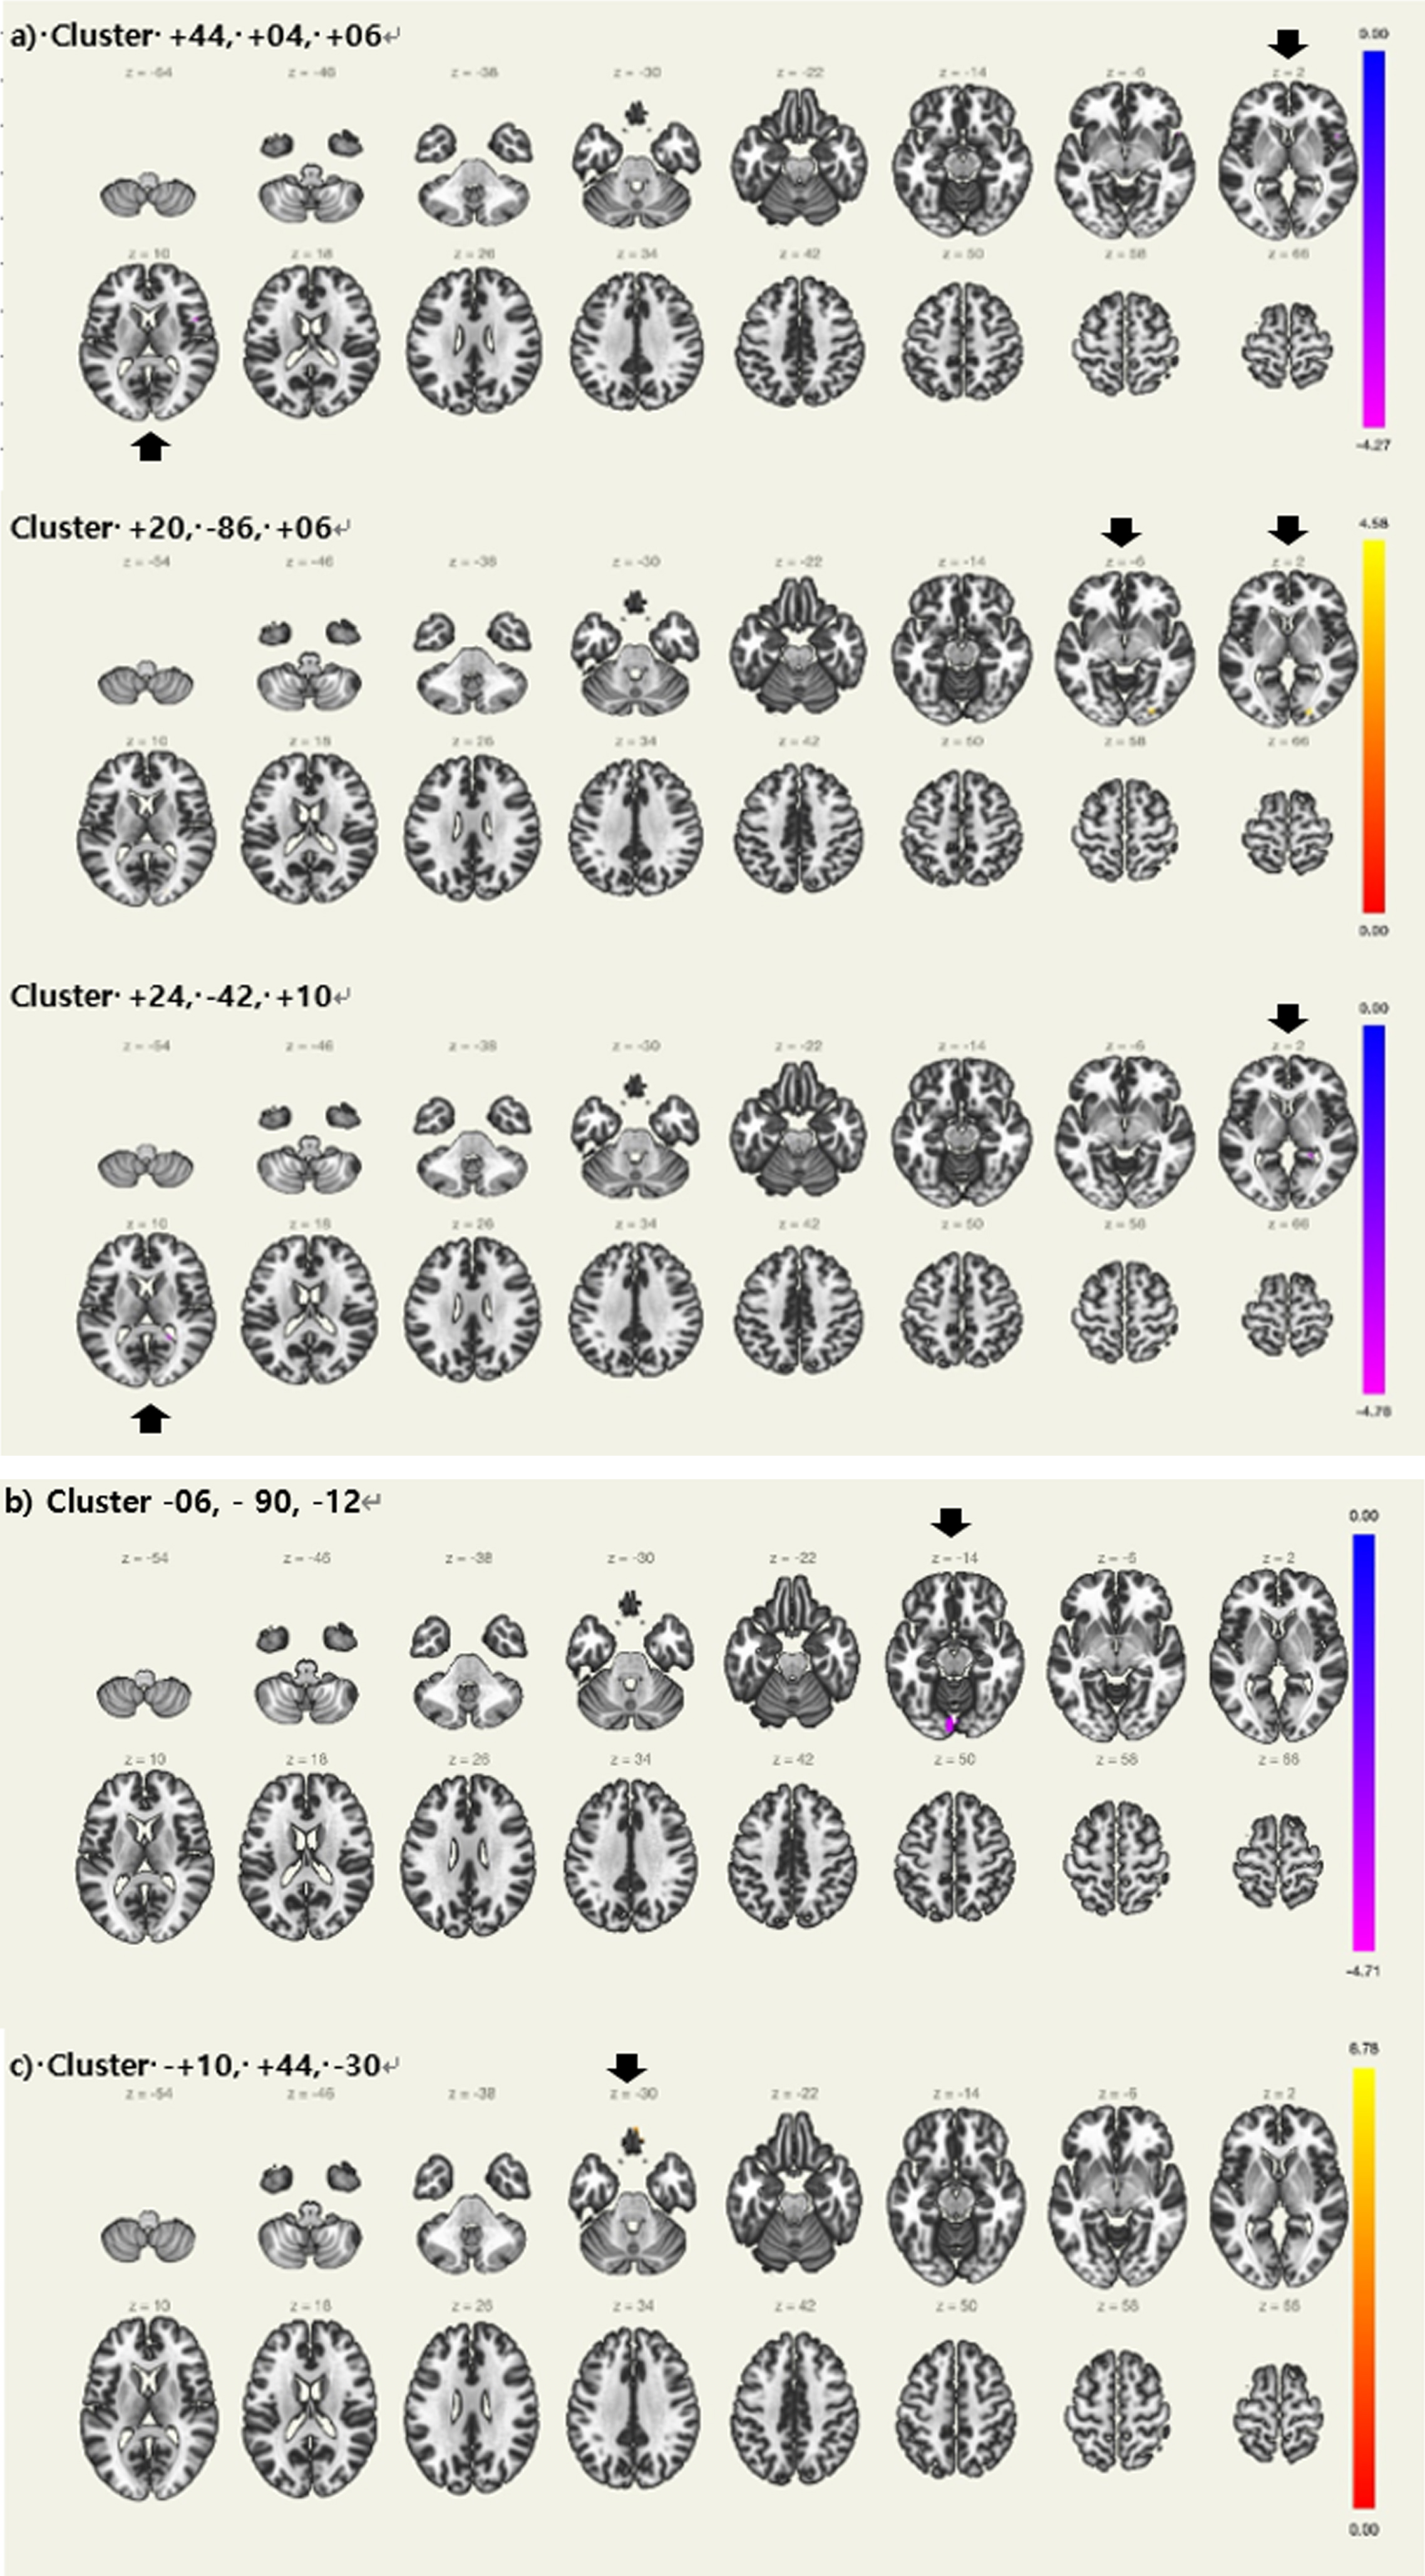 Regions with differences in resting state functional connectivity between Aβ+aMCI with prolonged sleep latency and normal sleep latency controlling for apolipoprotein ɛ4 carrier status a) Locus coeruleus. b) Left thalamus, c) Left hippocampus, Aβ+ aMCI = Amyloid positive amnestic mild cognitive impairment (Black arrows showing regions with significance).